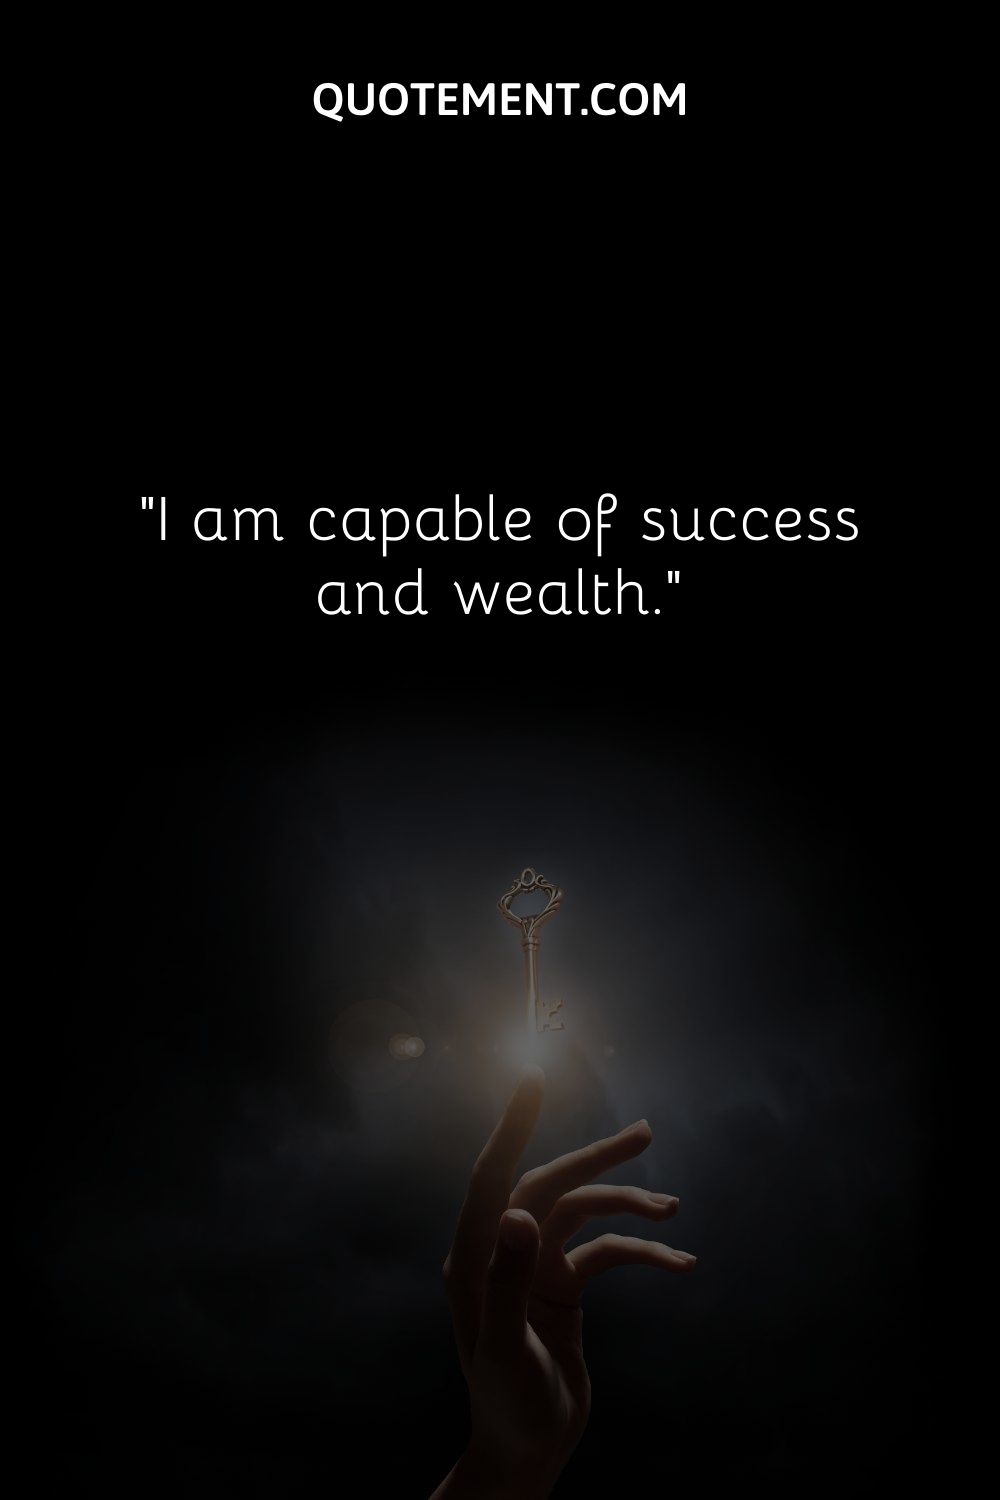 I am capable of success and wealth